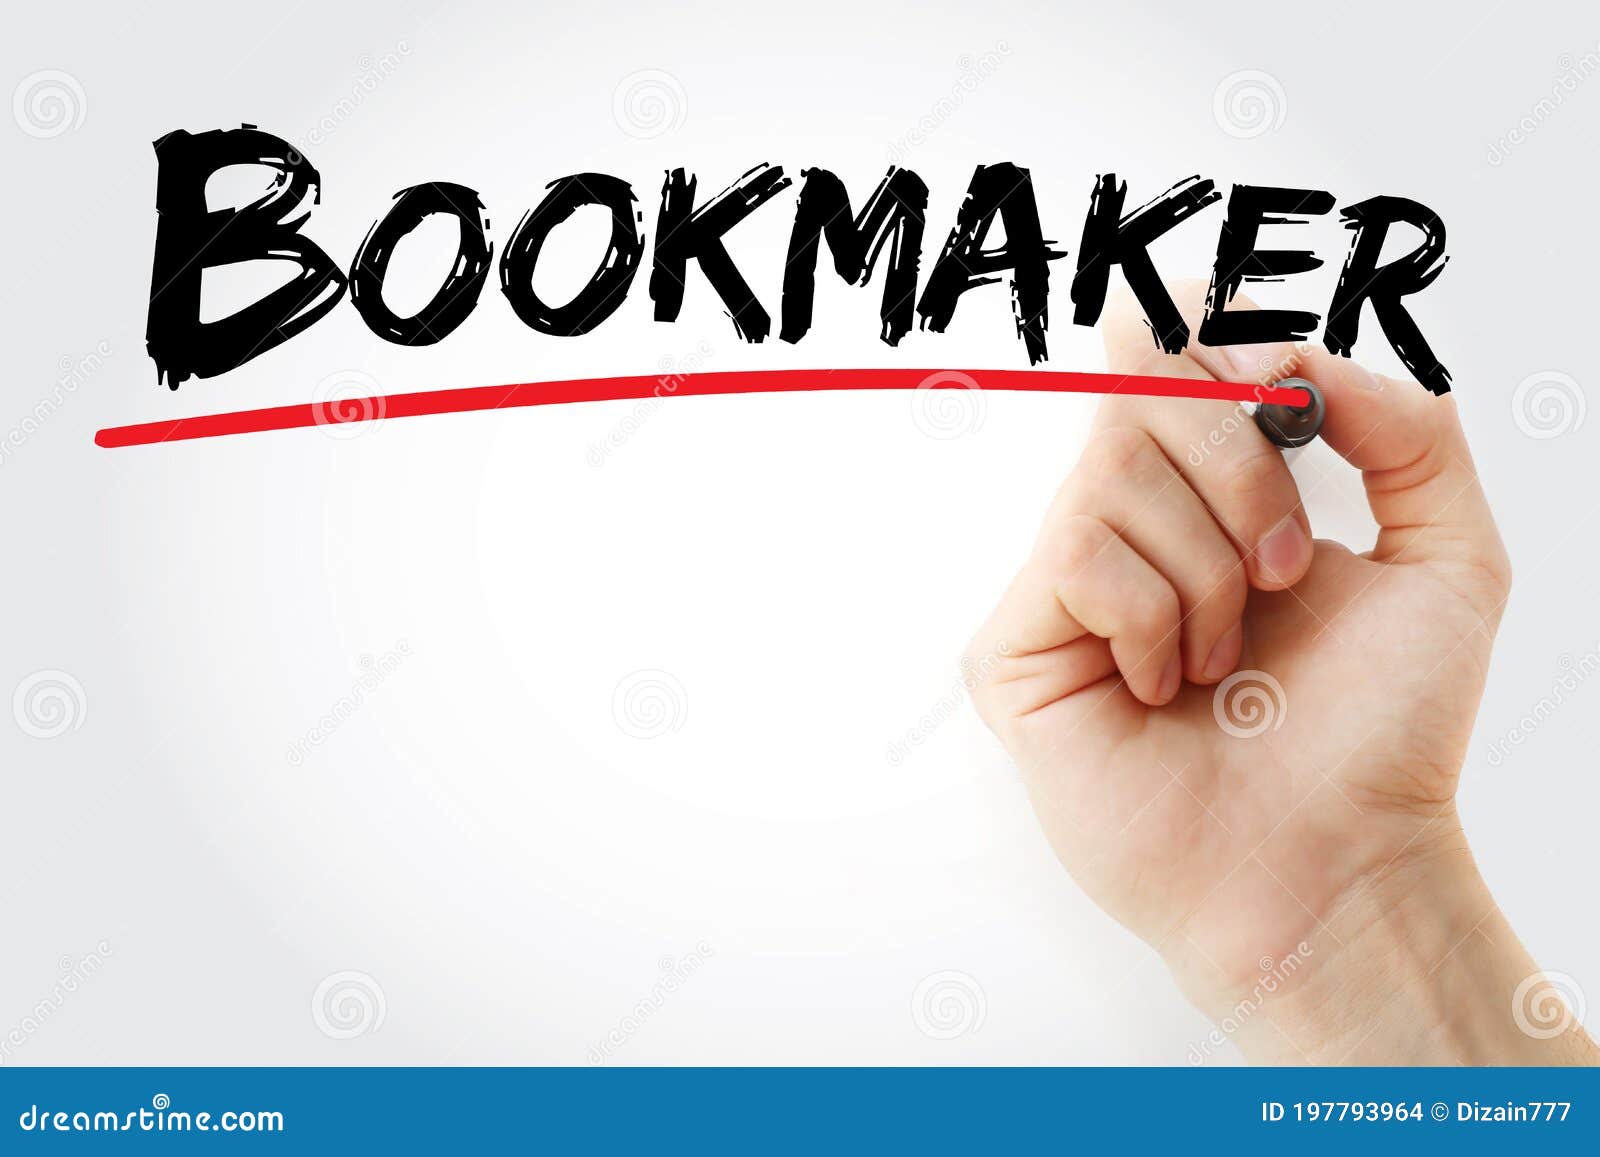 bookmaker text with marker